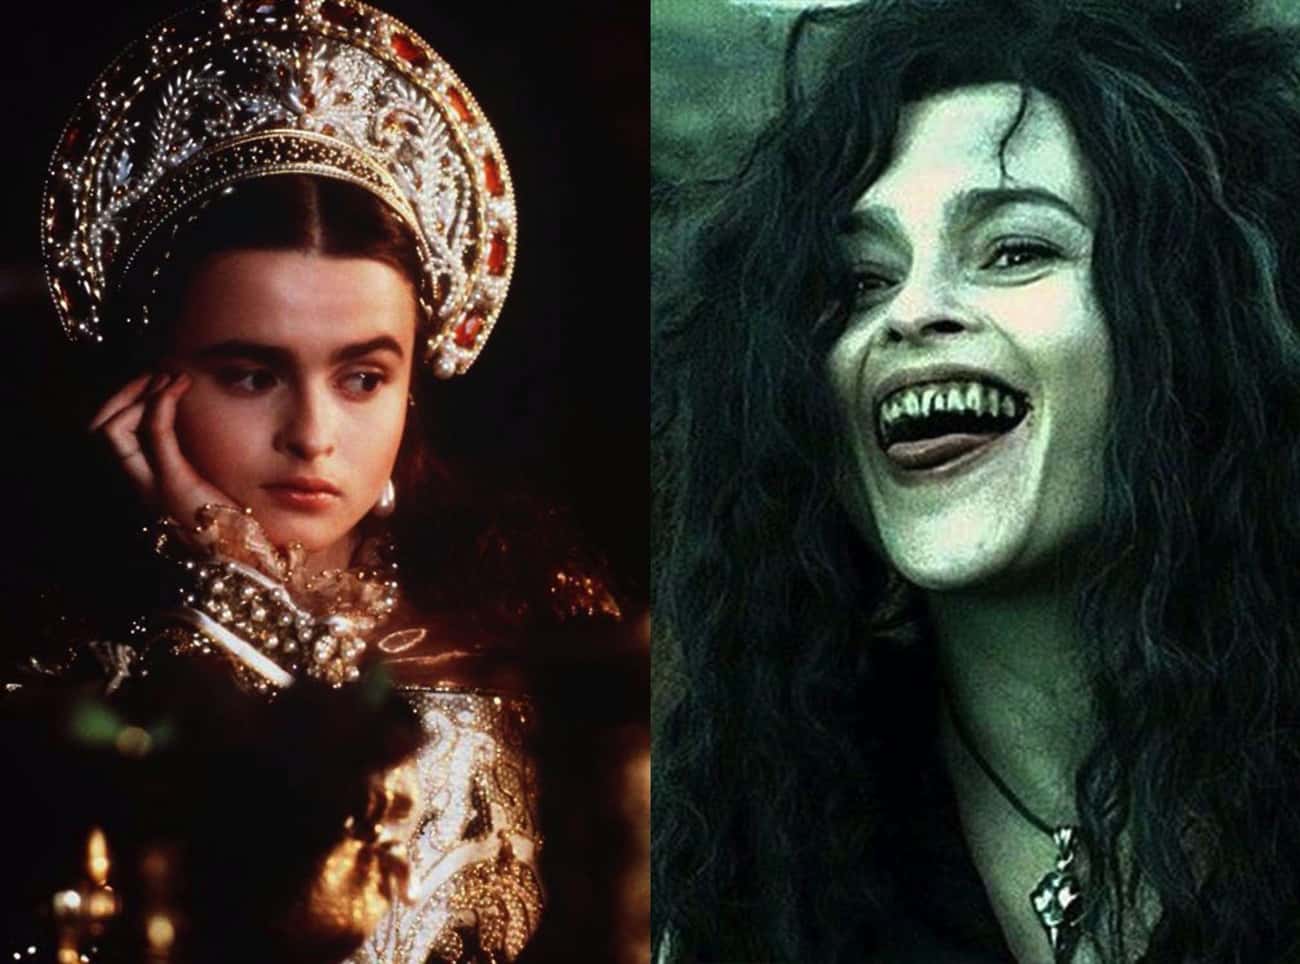 Helena Bonham Carter Is One Of Britain's Finest Actresses, And She Began In Films As Lady Jane Grey In 'Lady Jane' (1986) Before Taking On The More Maniacal Part Of Death Eater Bellatrix Lestrange In The 'Harry Potter' Films